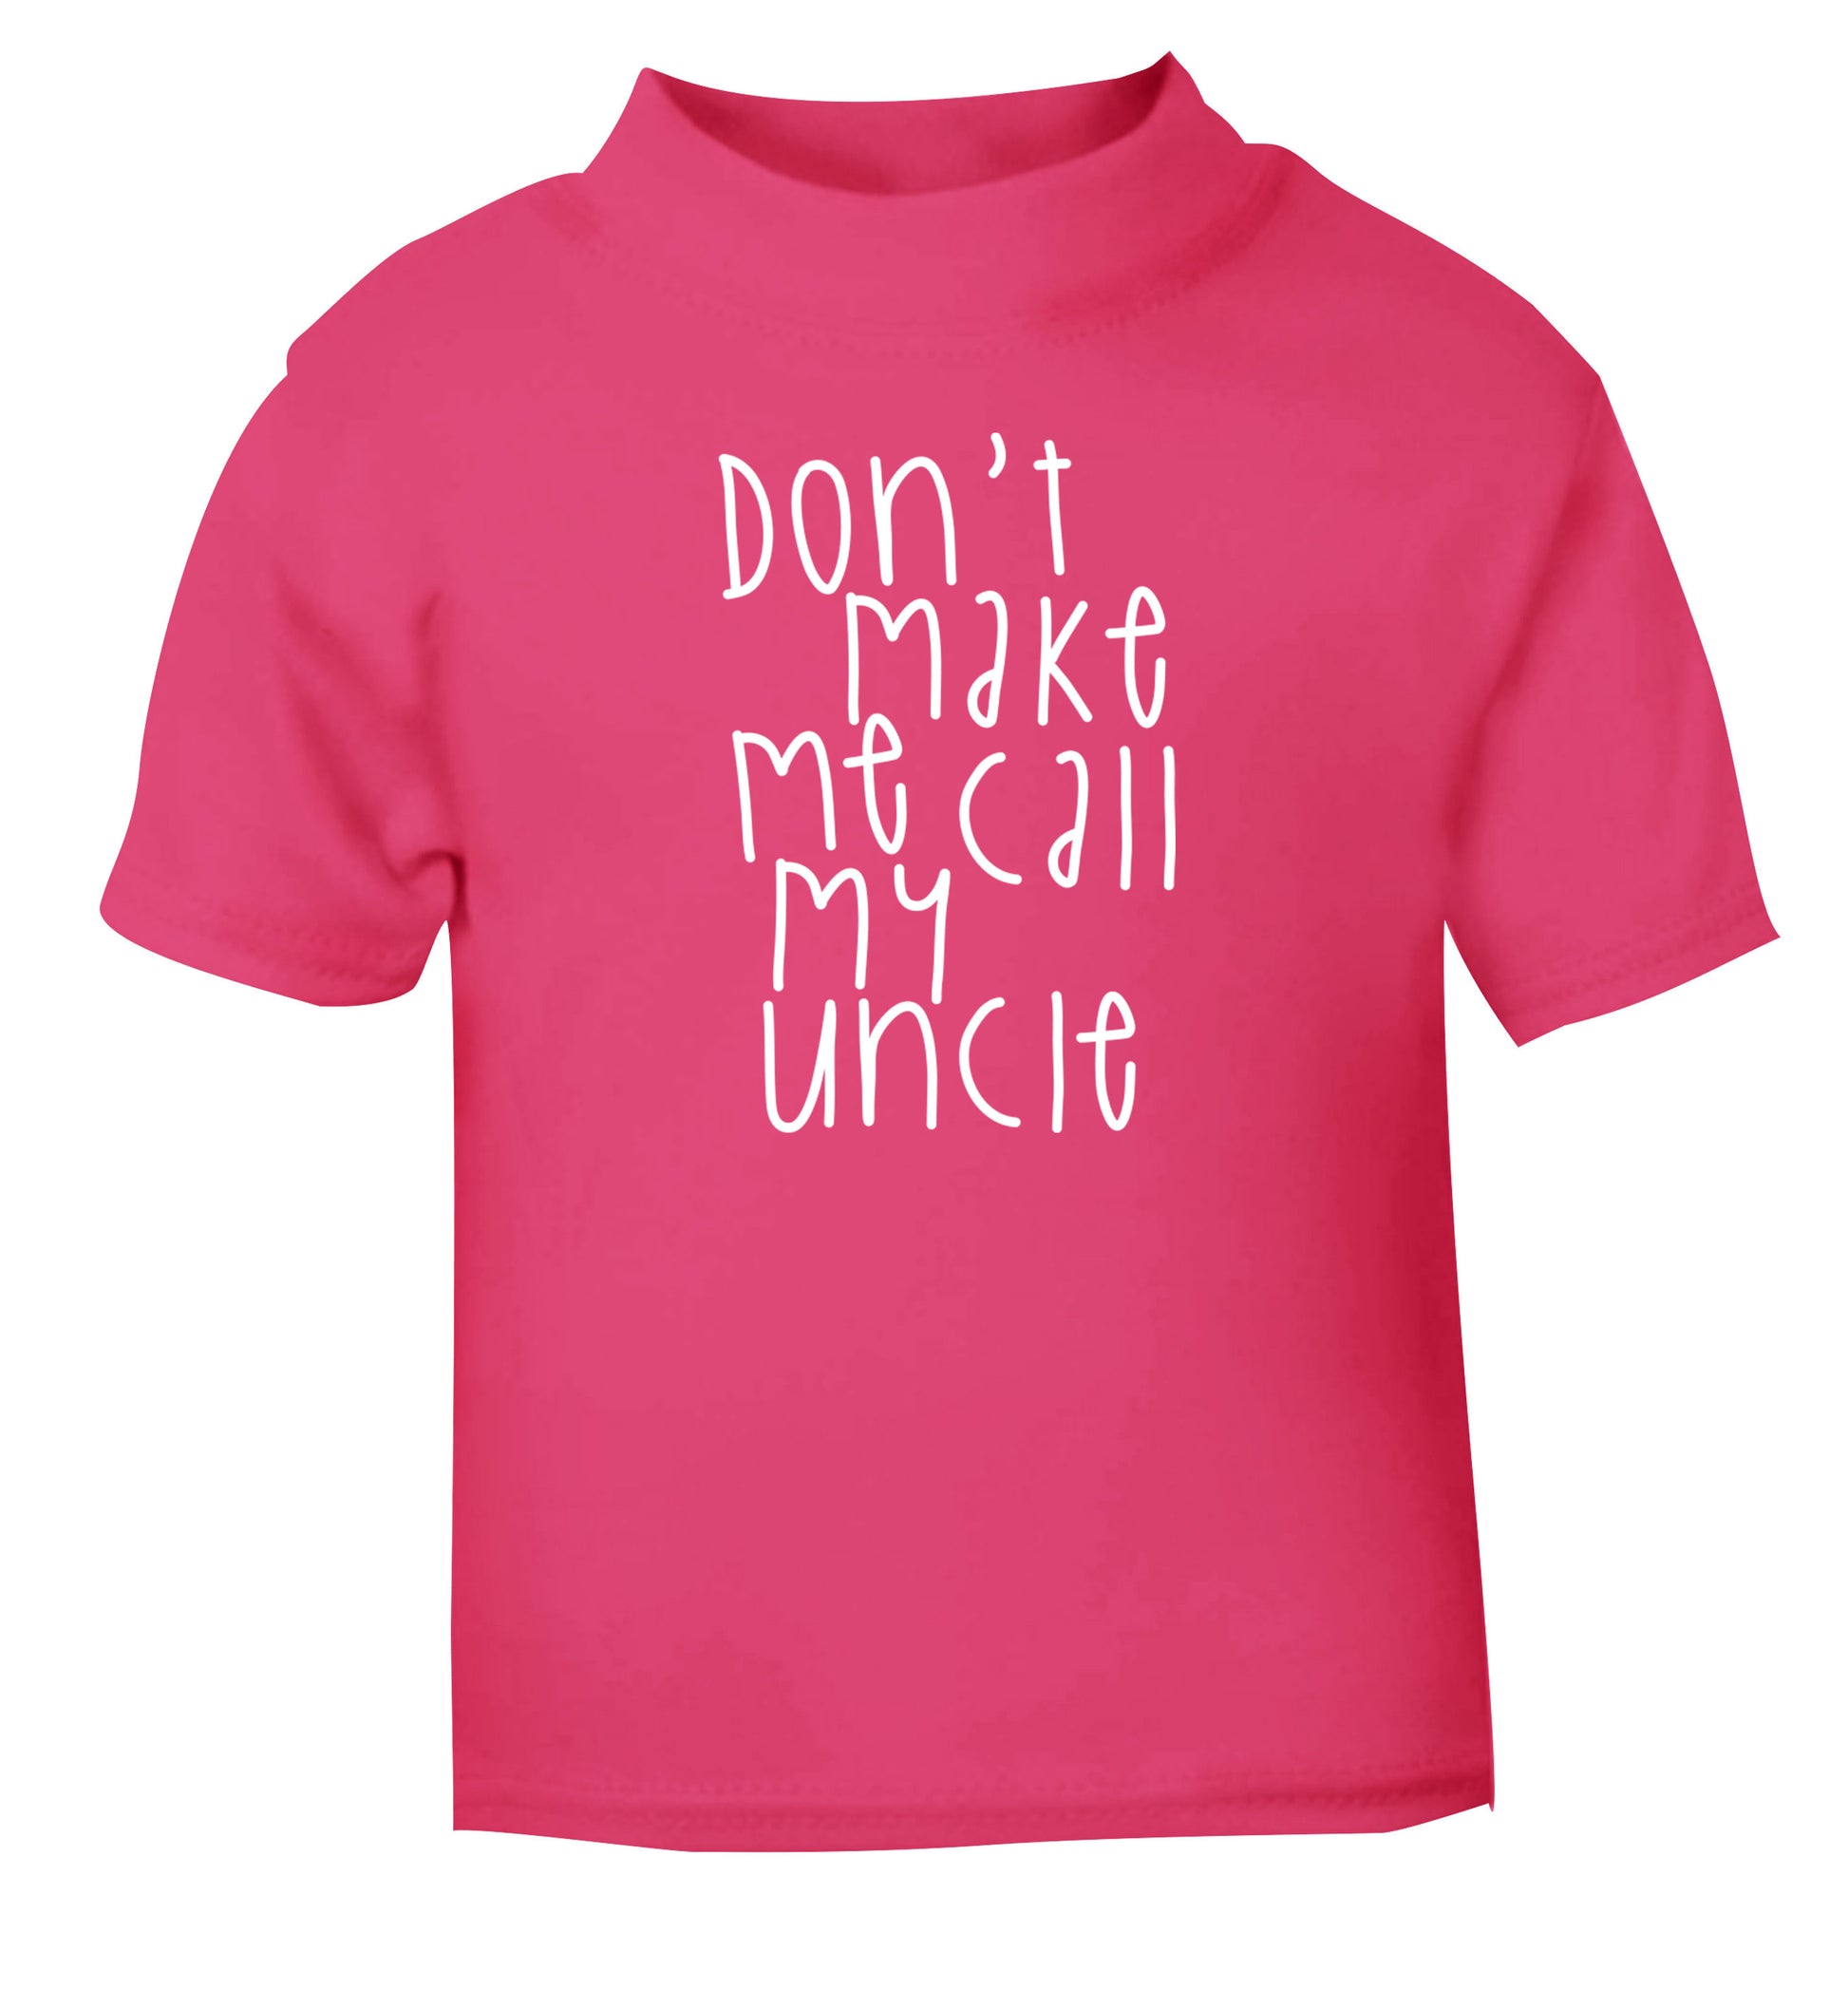 Don't make me call my uncle pink Baby Toddler Tshirt 2 Years